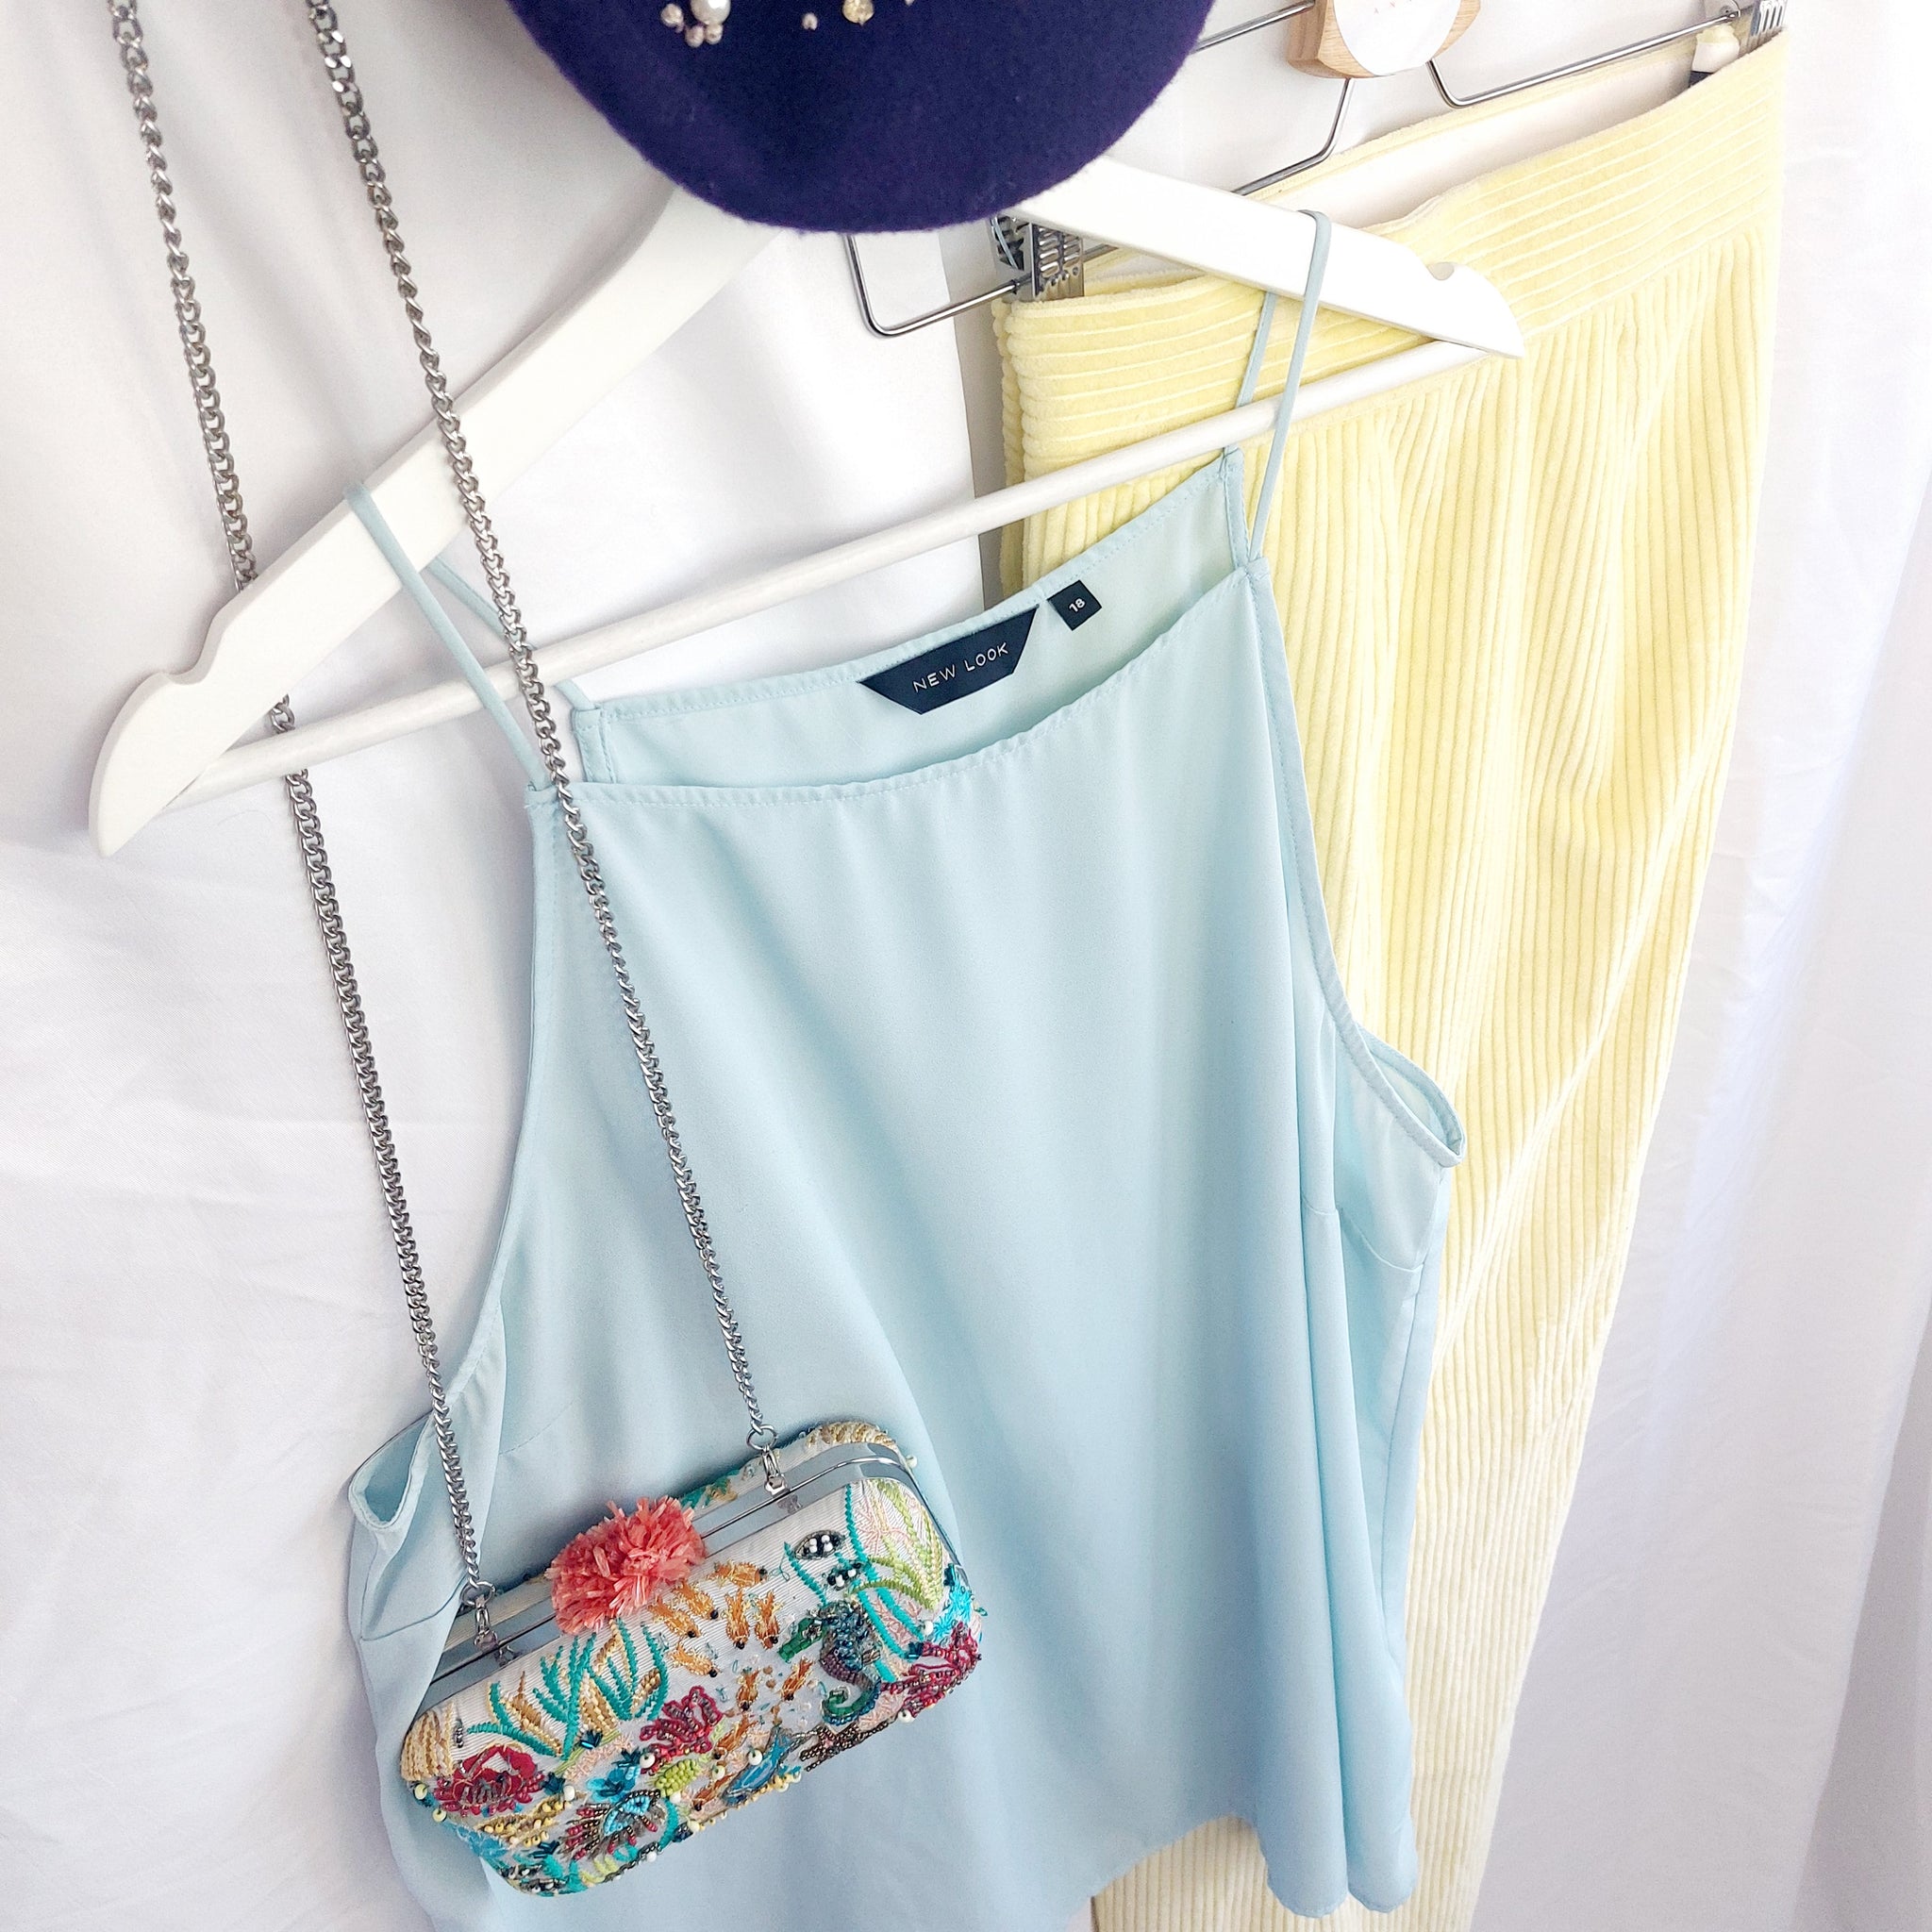 BABY BLUE STRAP TOP - UK18